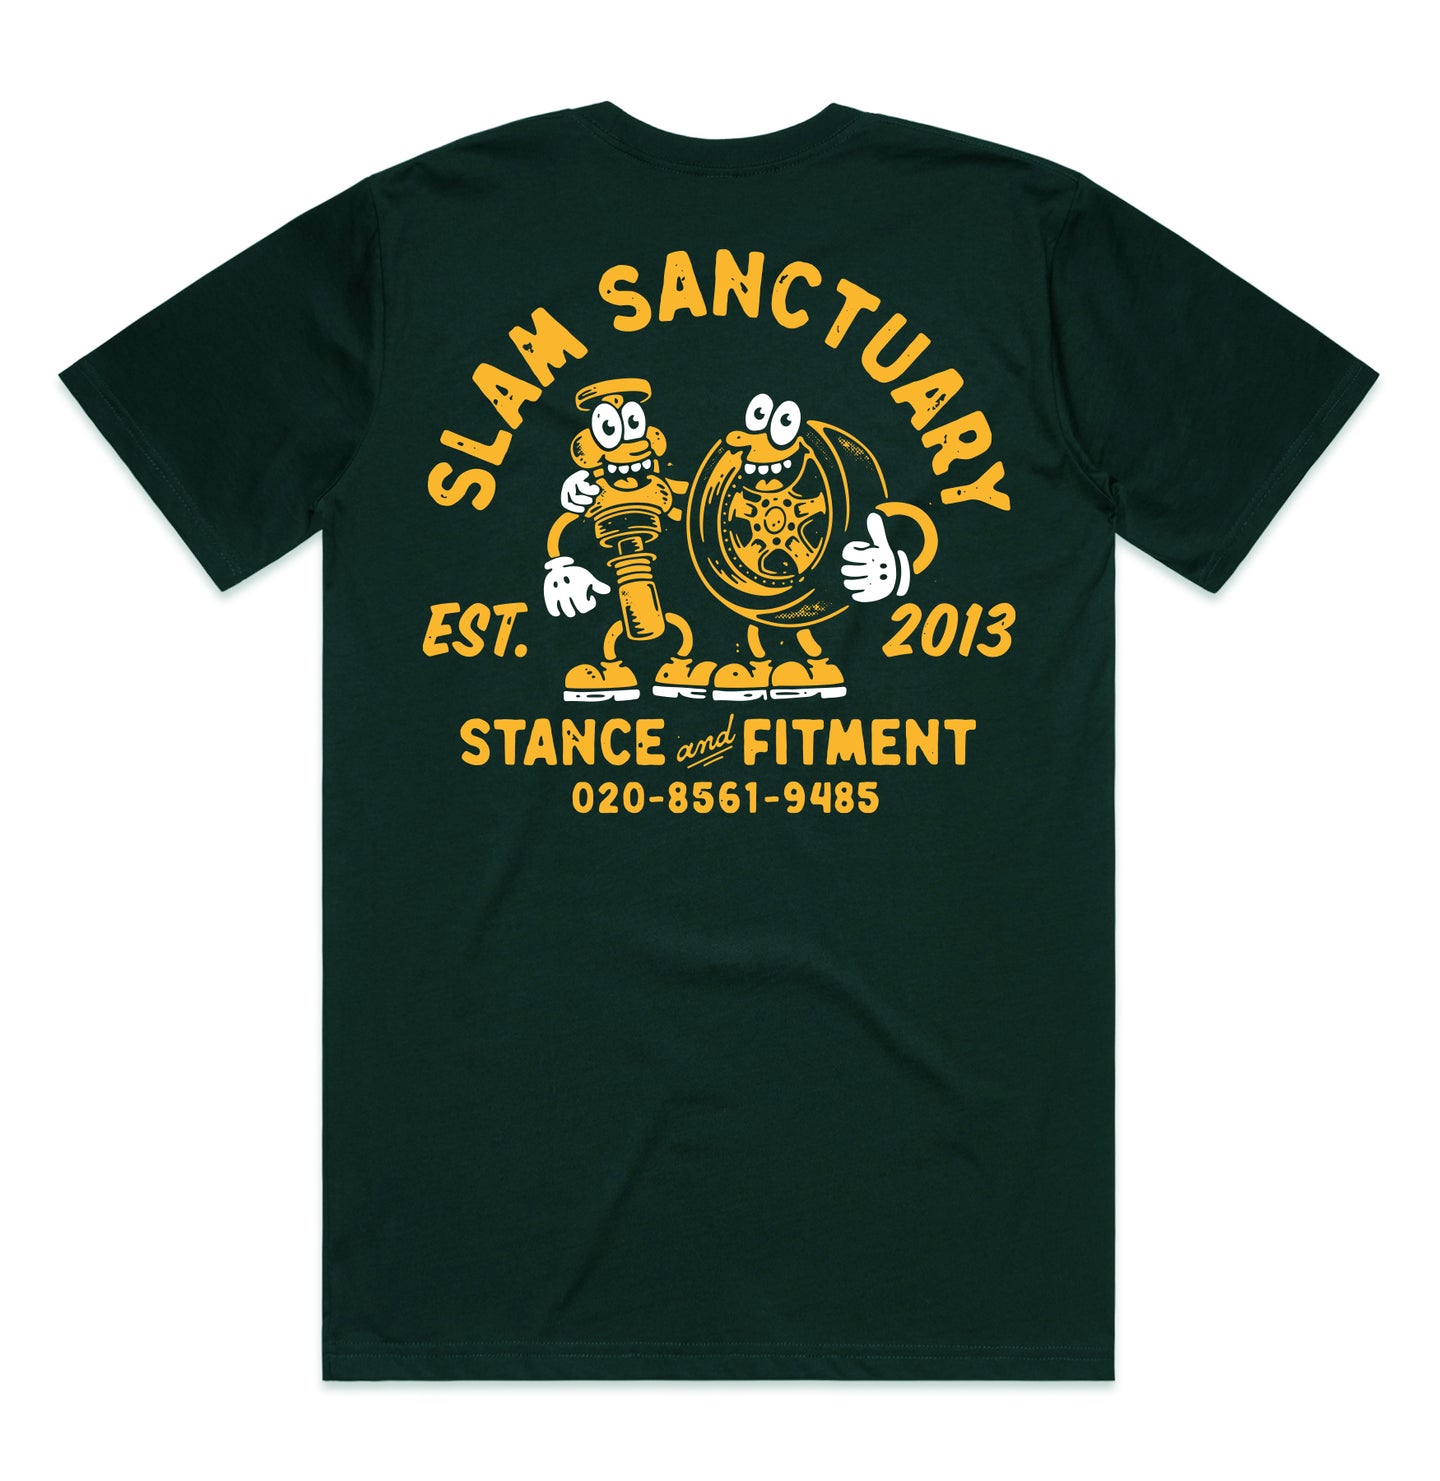 STANCE & FITMENT T-SHIRT - PINE GREEN